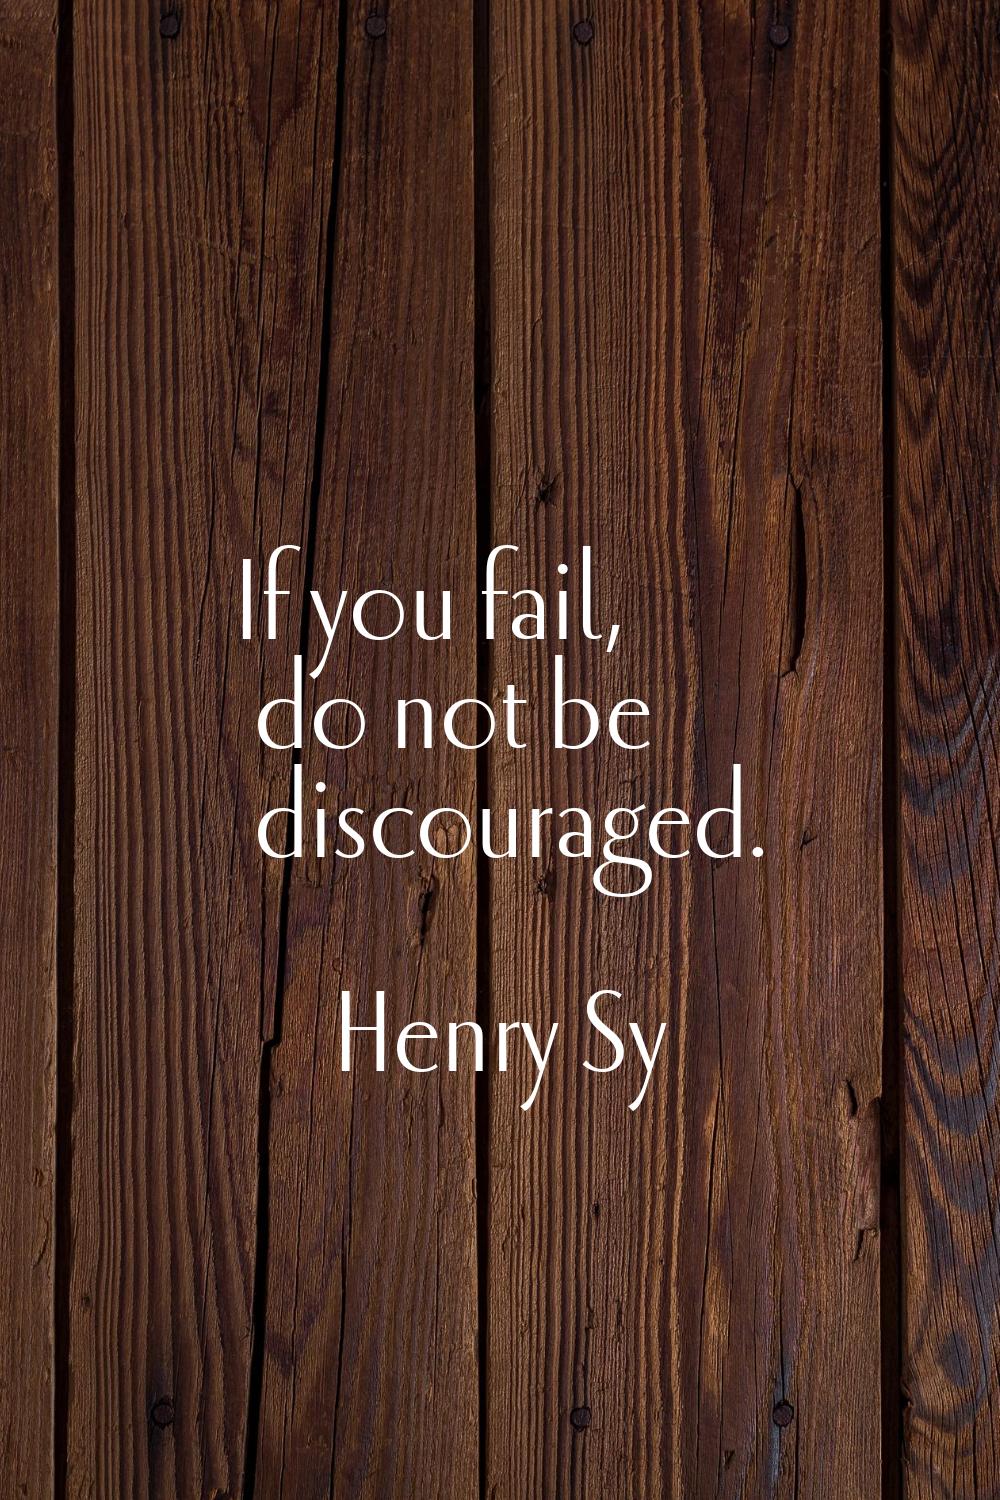 If you fail, do not be discouraged.